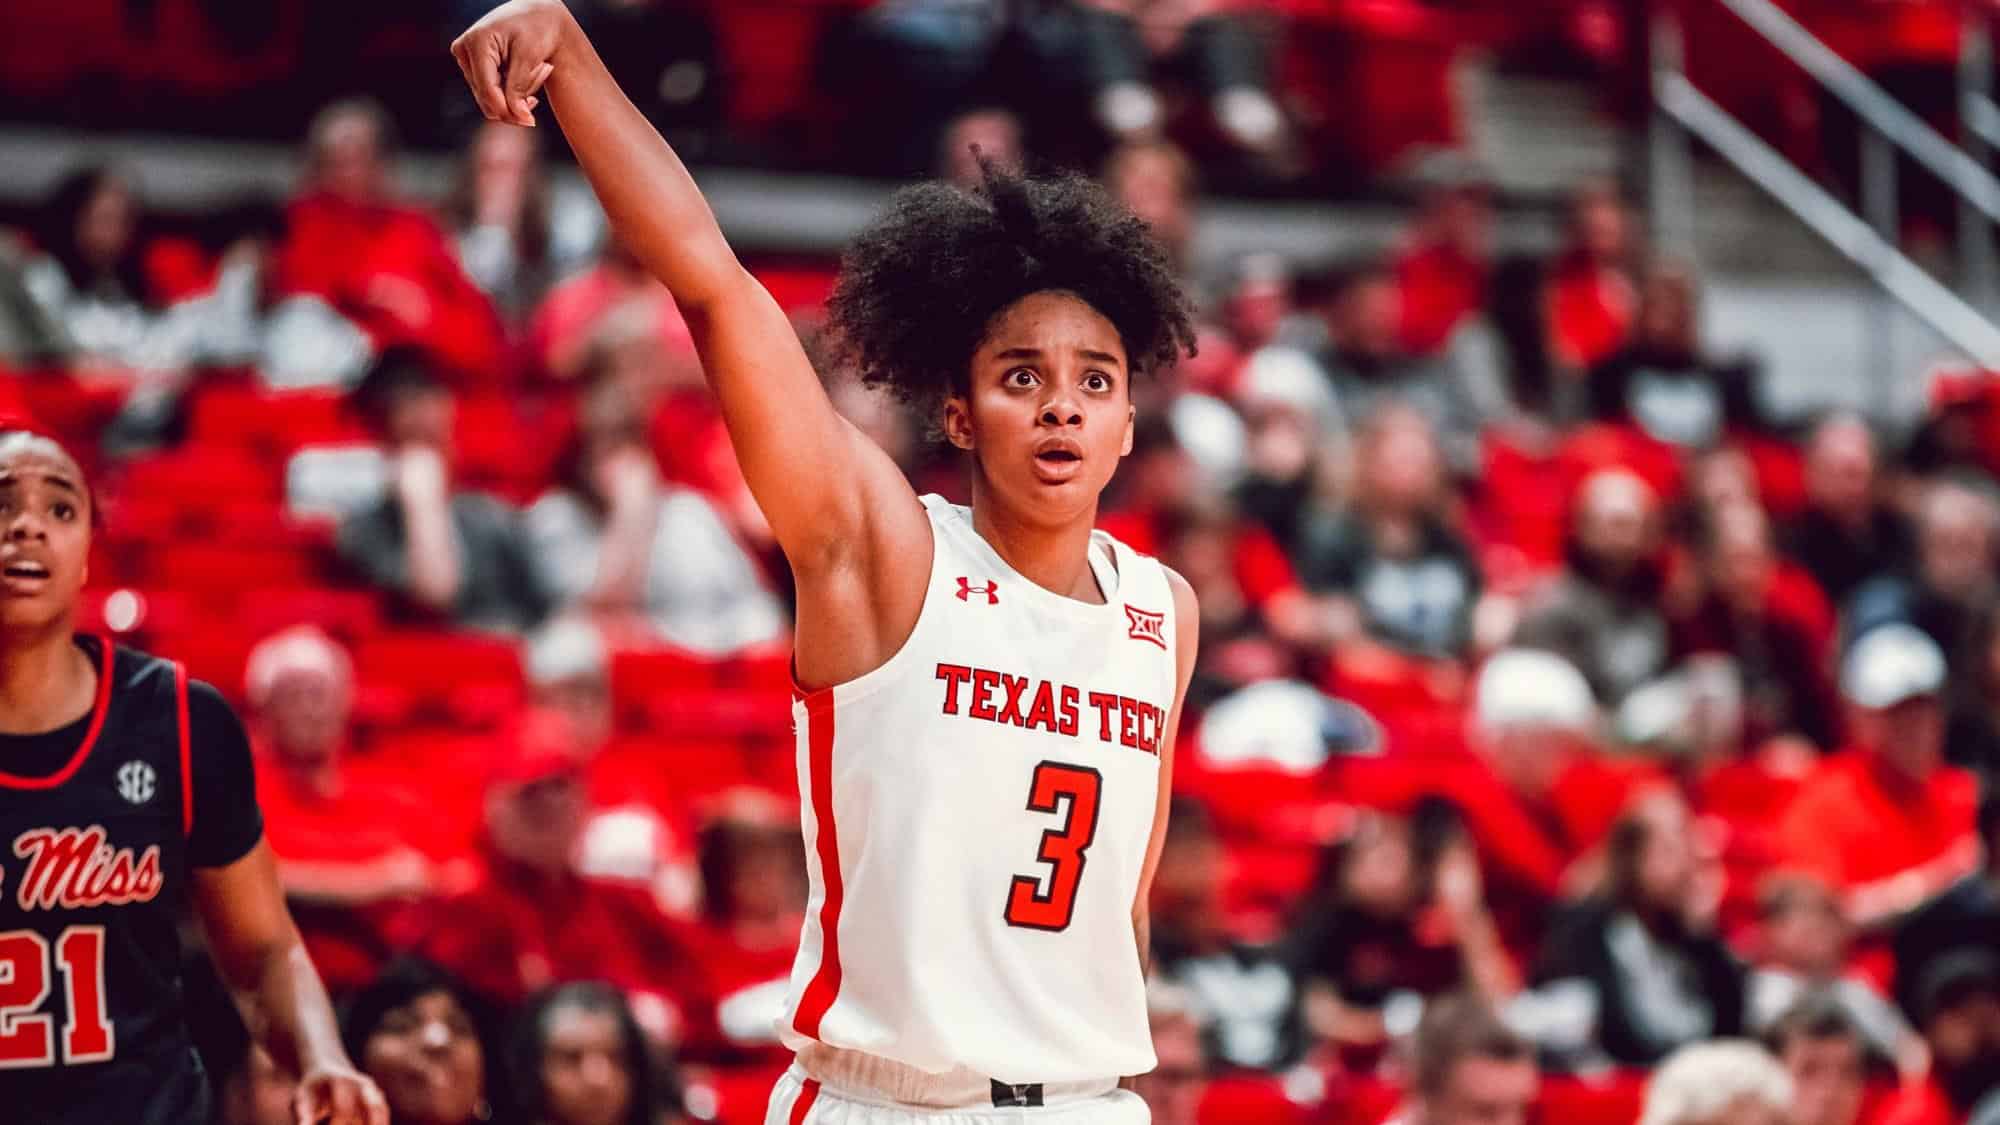 Ricka “Maka” Jackson is shown above playing for Texas Tech University as a junior. The former South Georgia Technical College standout will be a senior this coming season.